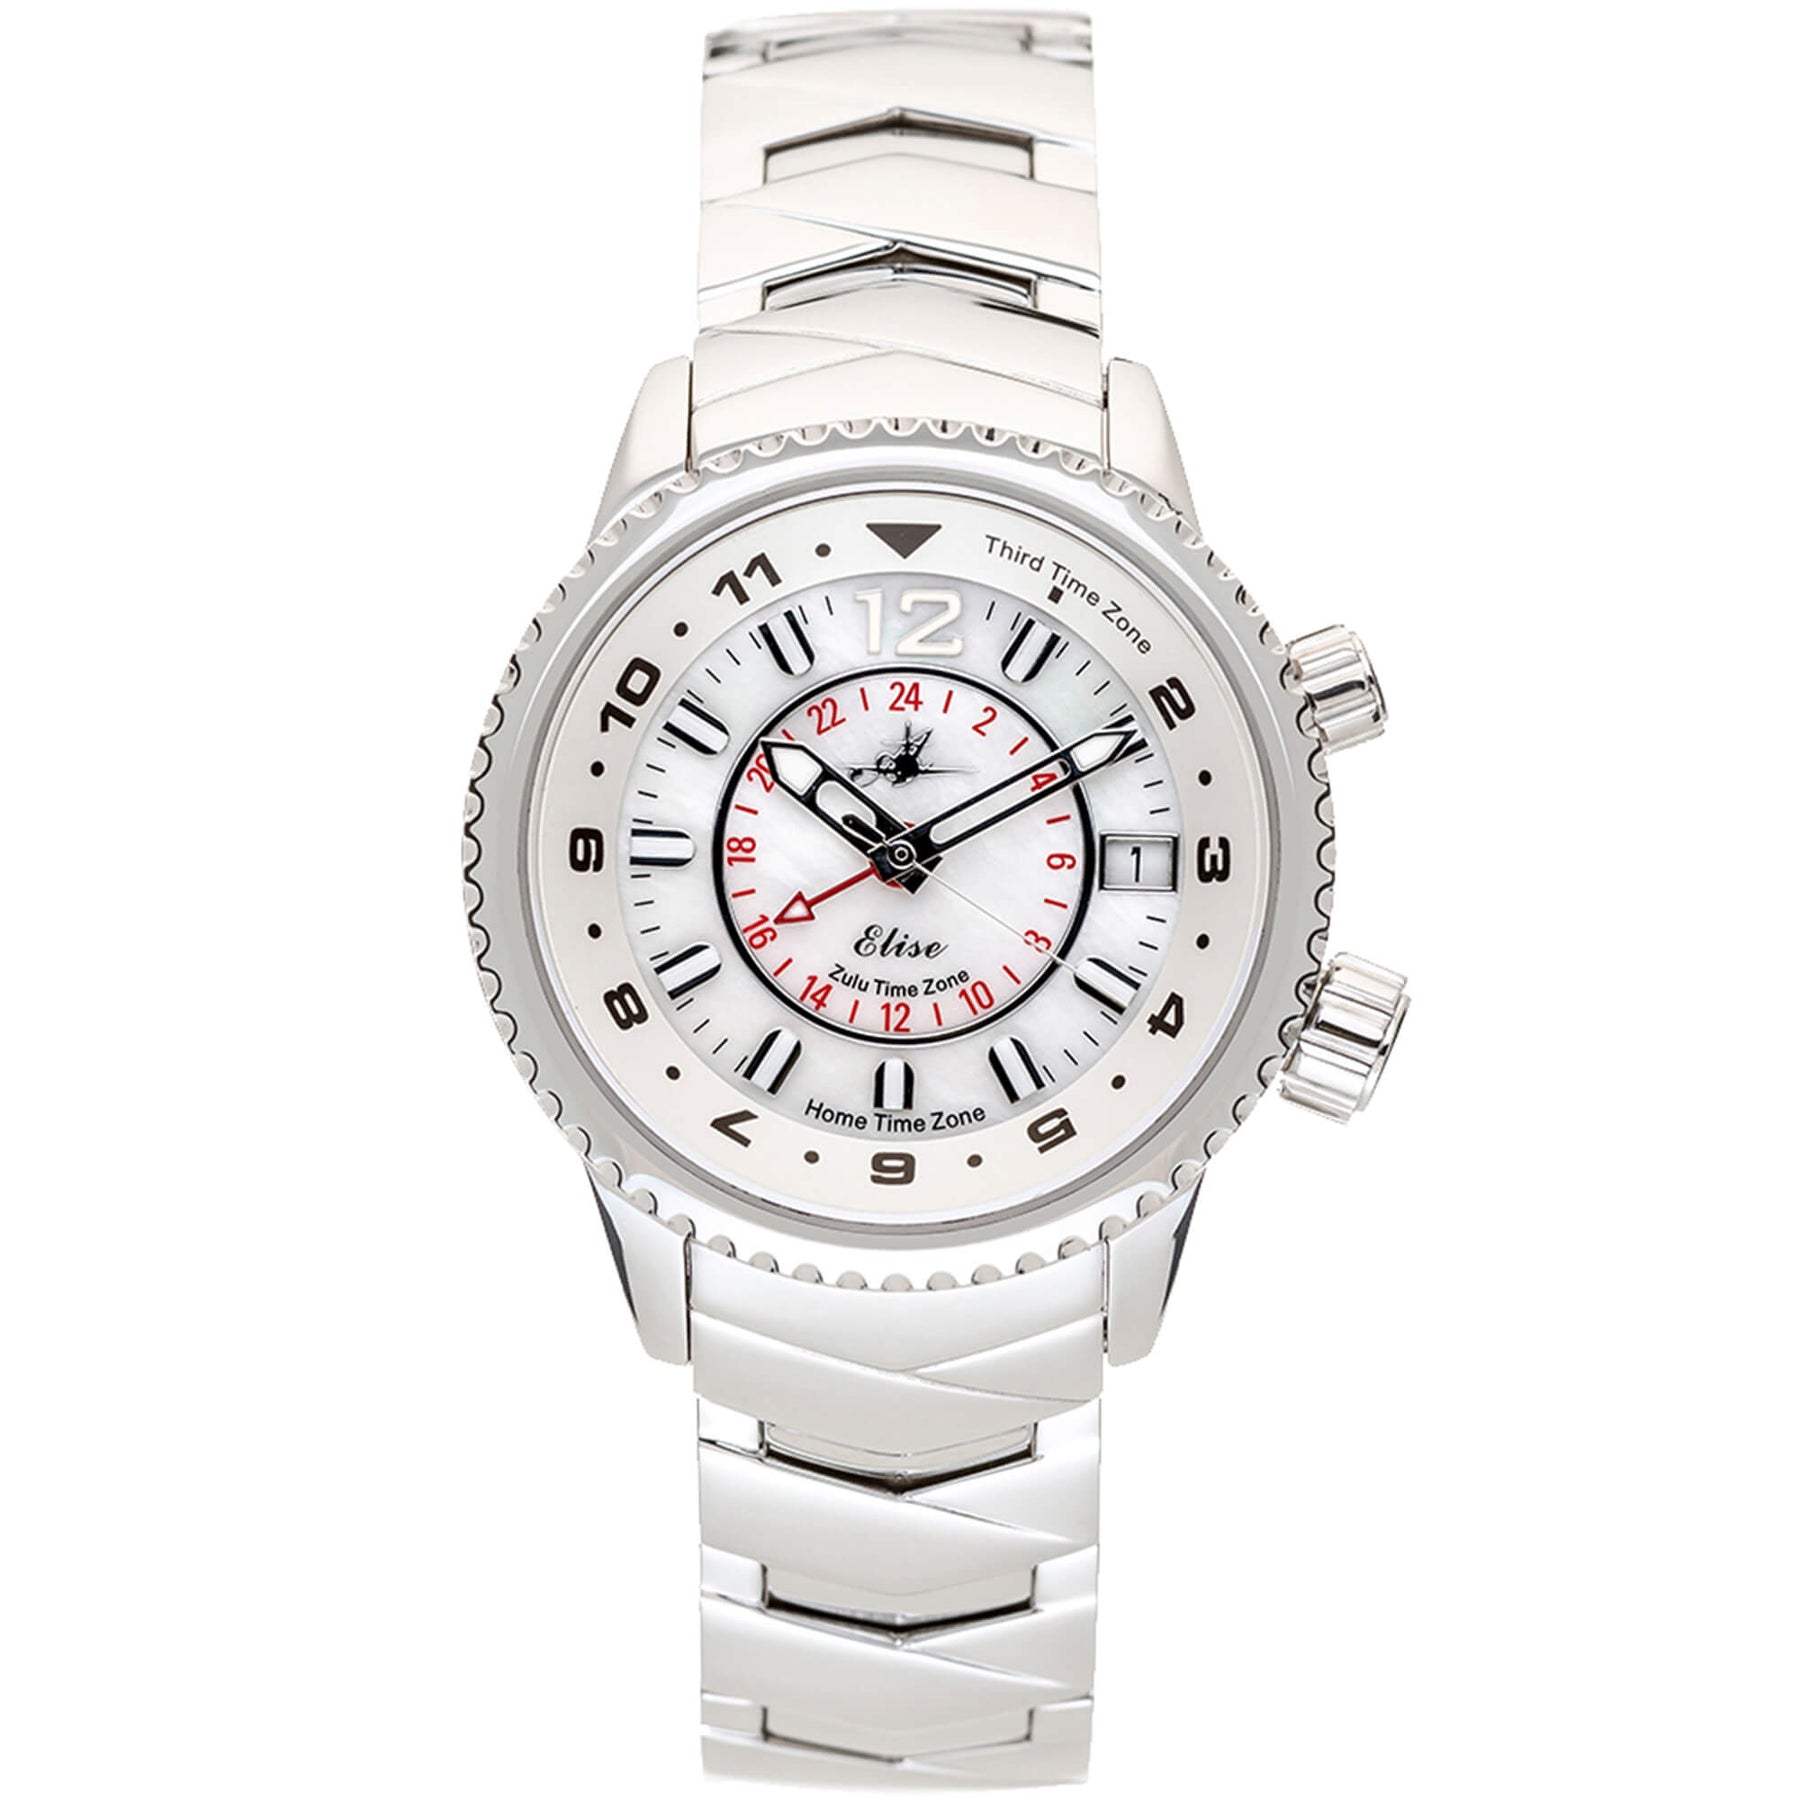 Abingdon Co. Elise Athenian Silver, a white aviation watch with three time zones